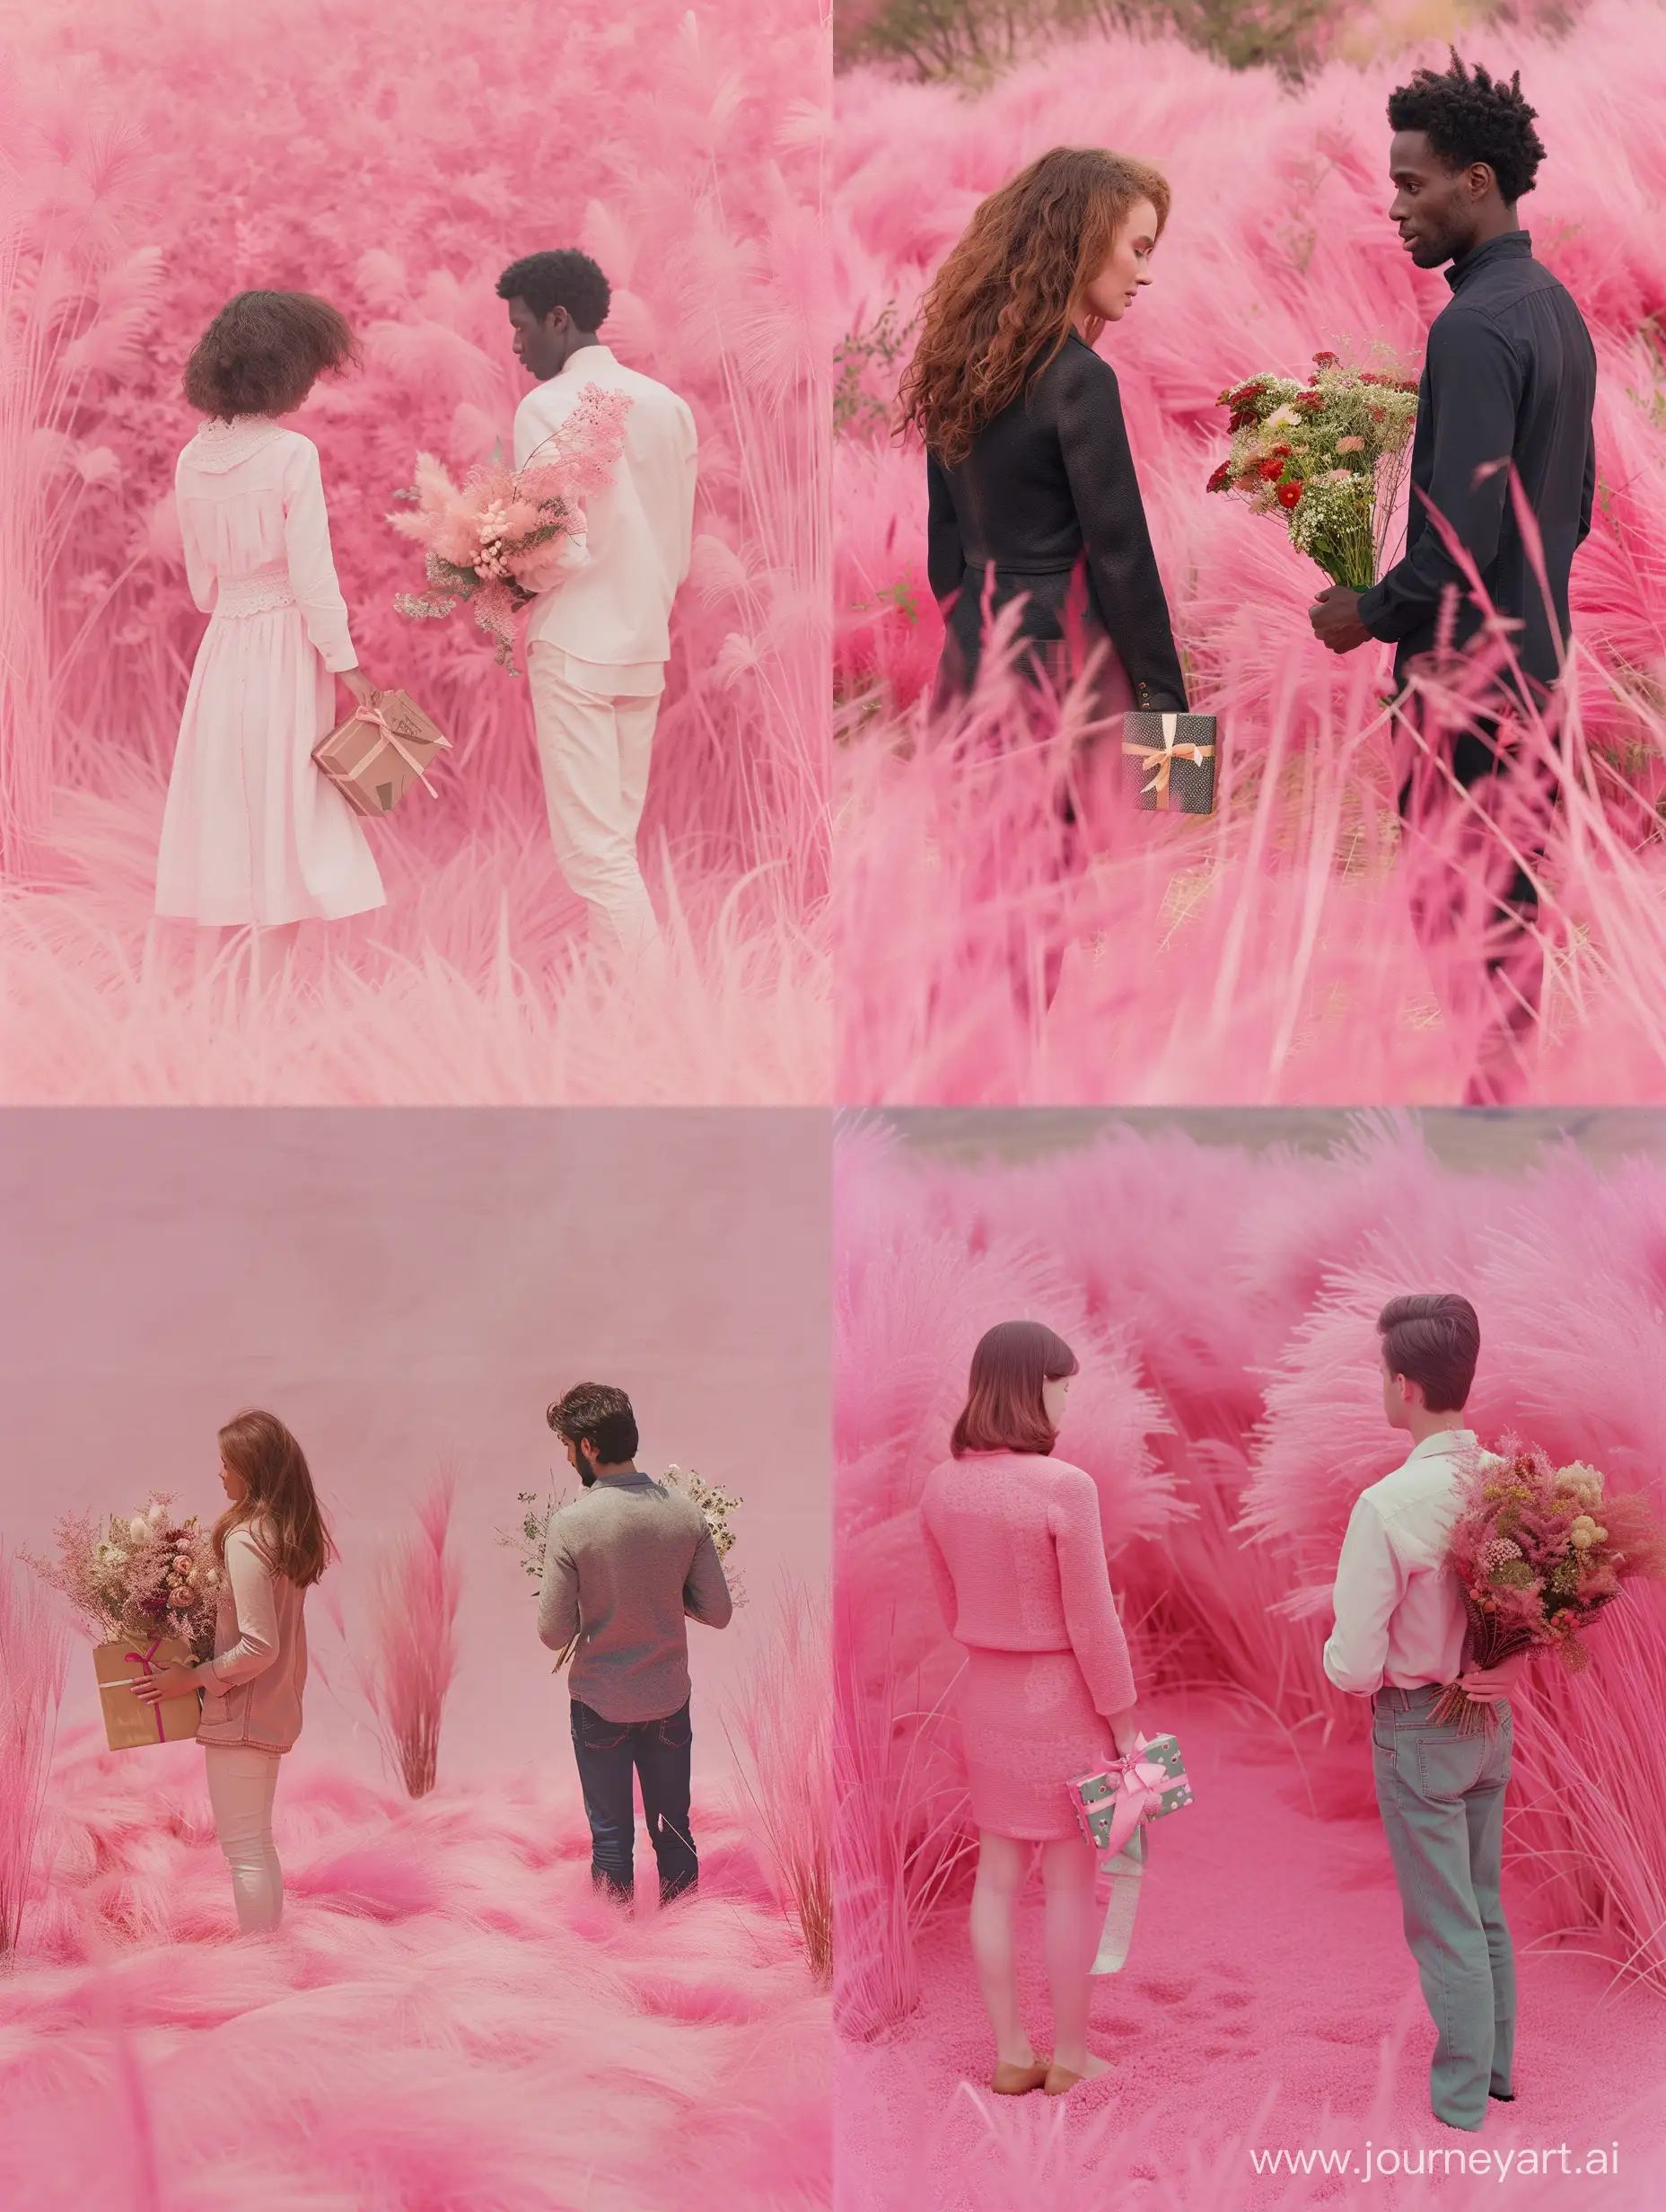 Couple-Surprising-Each-Other-with-Gifts-in-Pink-Grass-Field